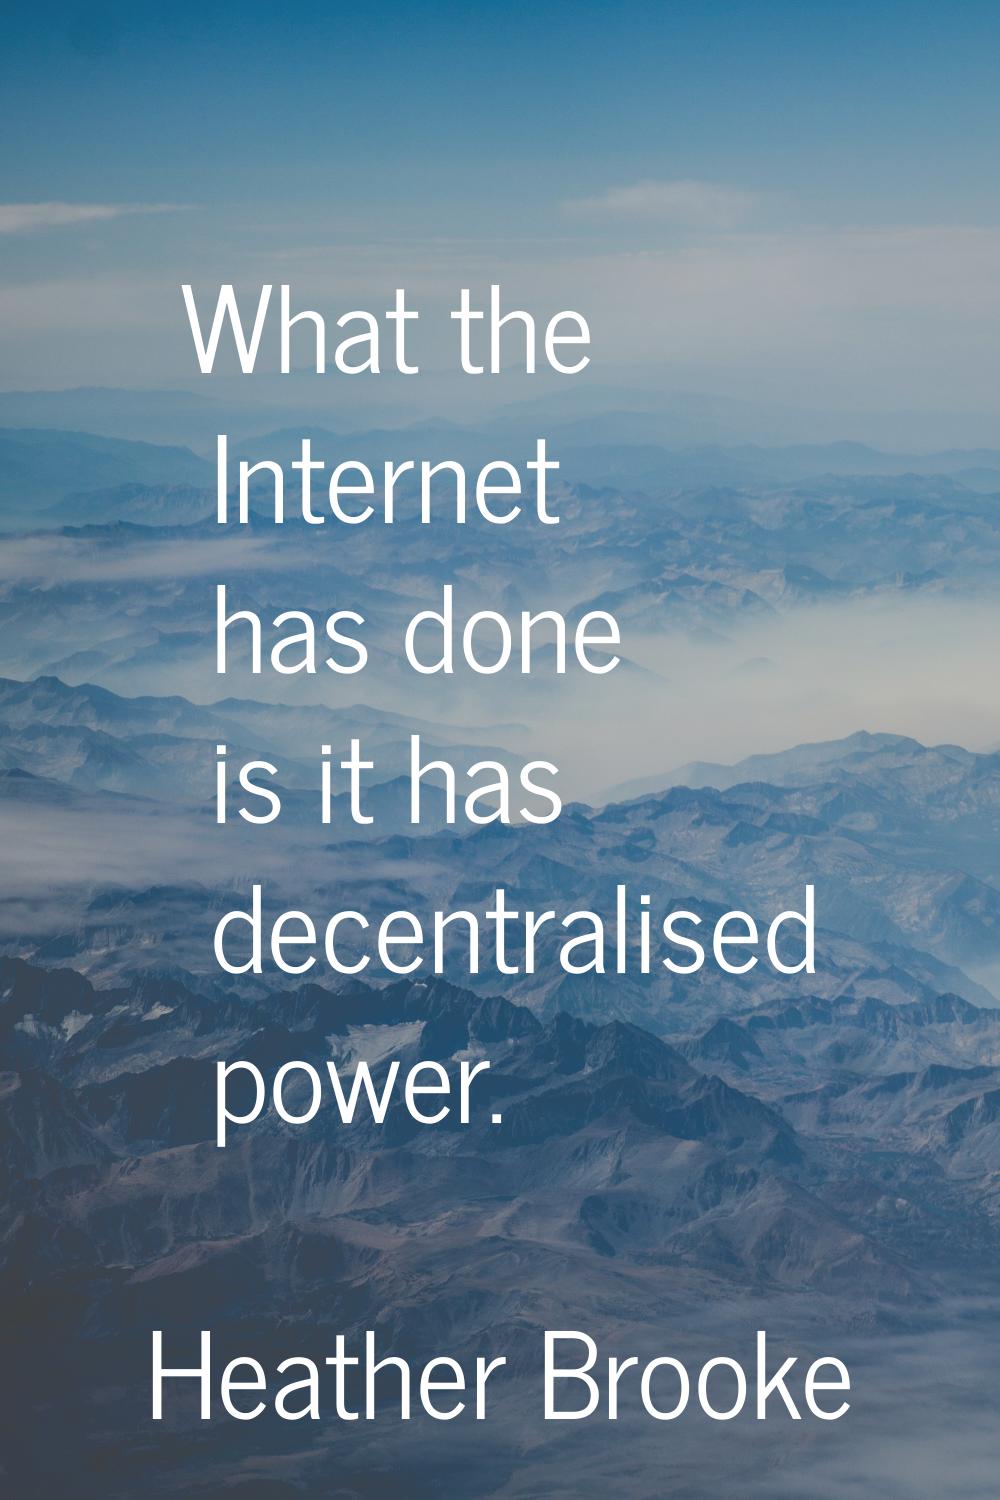 What the Internet has done is it has decentralised power.